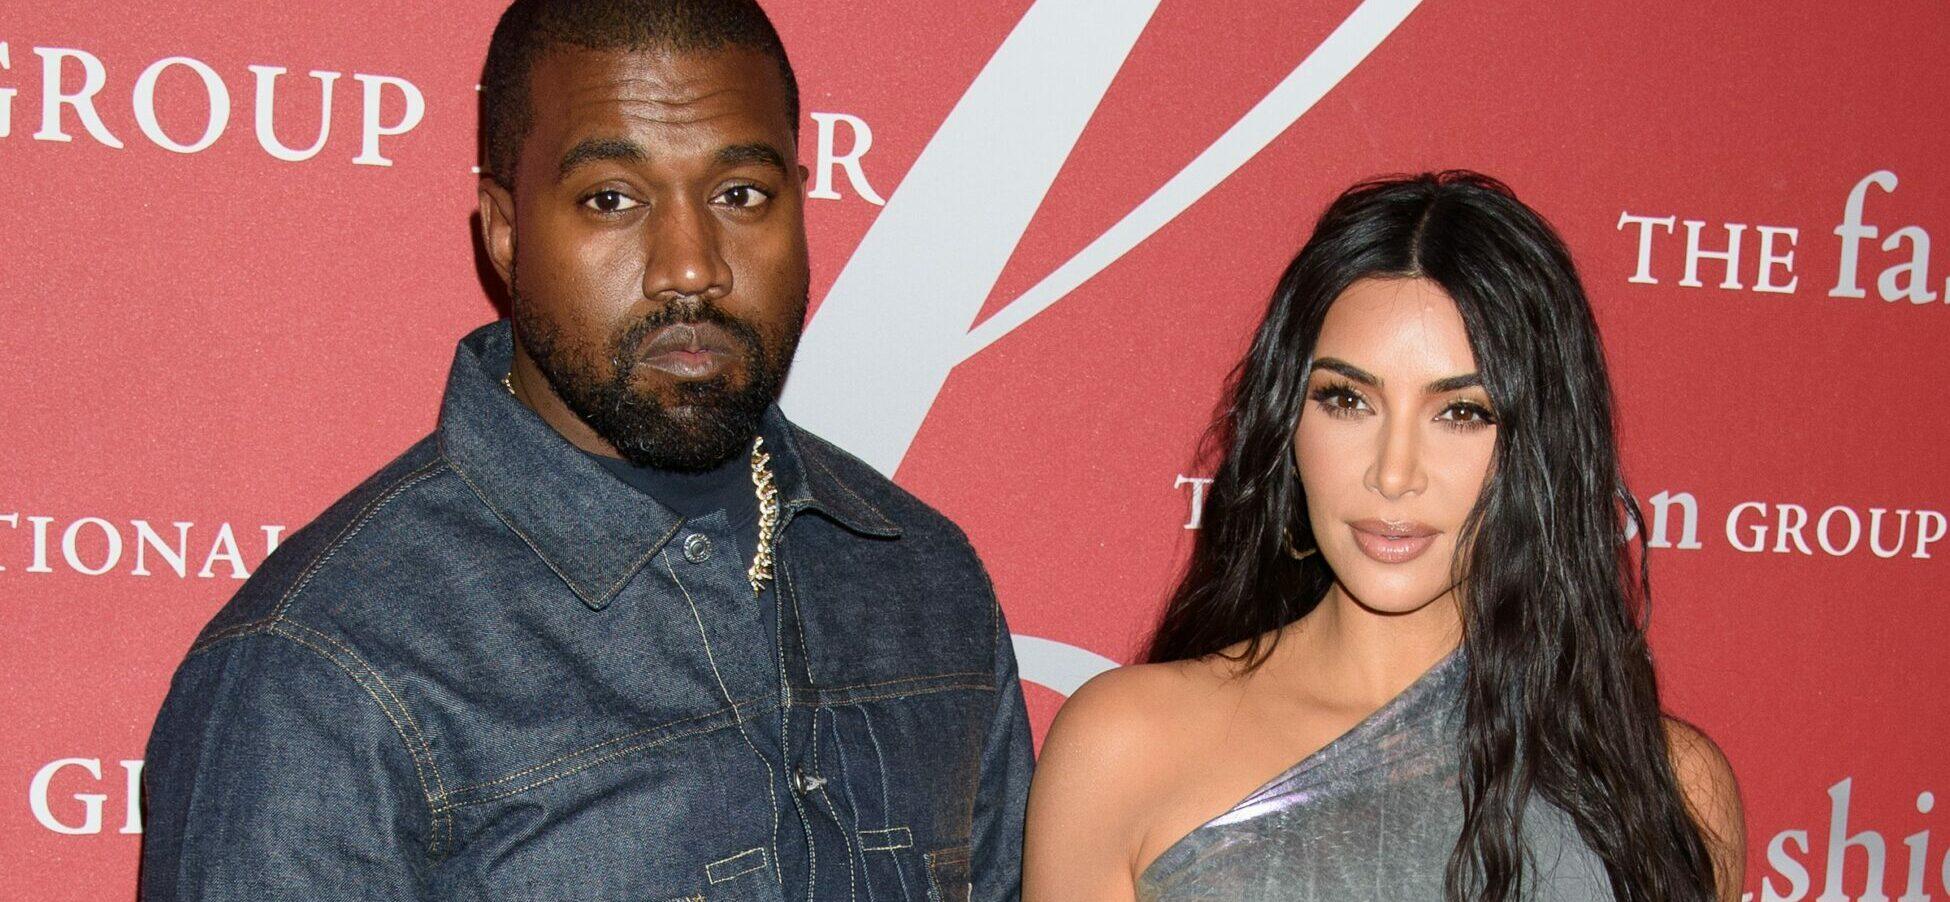 Kanye West Breaks His Silence On Divorce, Let’s Focus On ‘Our Beautiful Children’